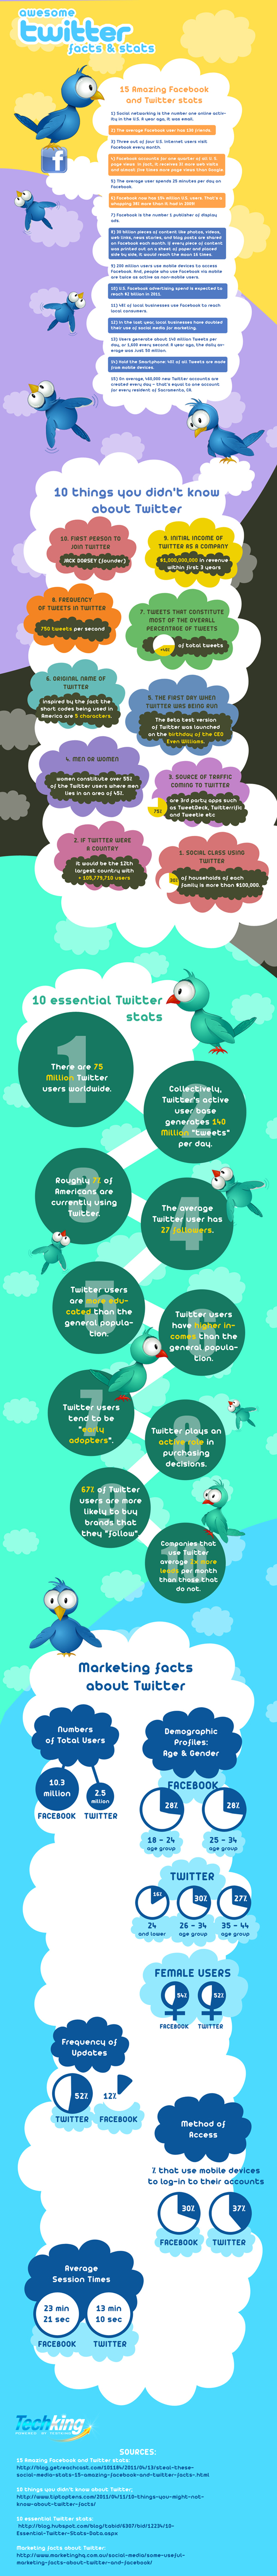 Awesome Twitter Facts & Stats - Infographic